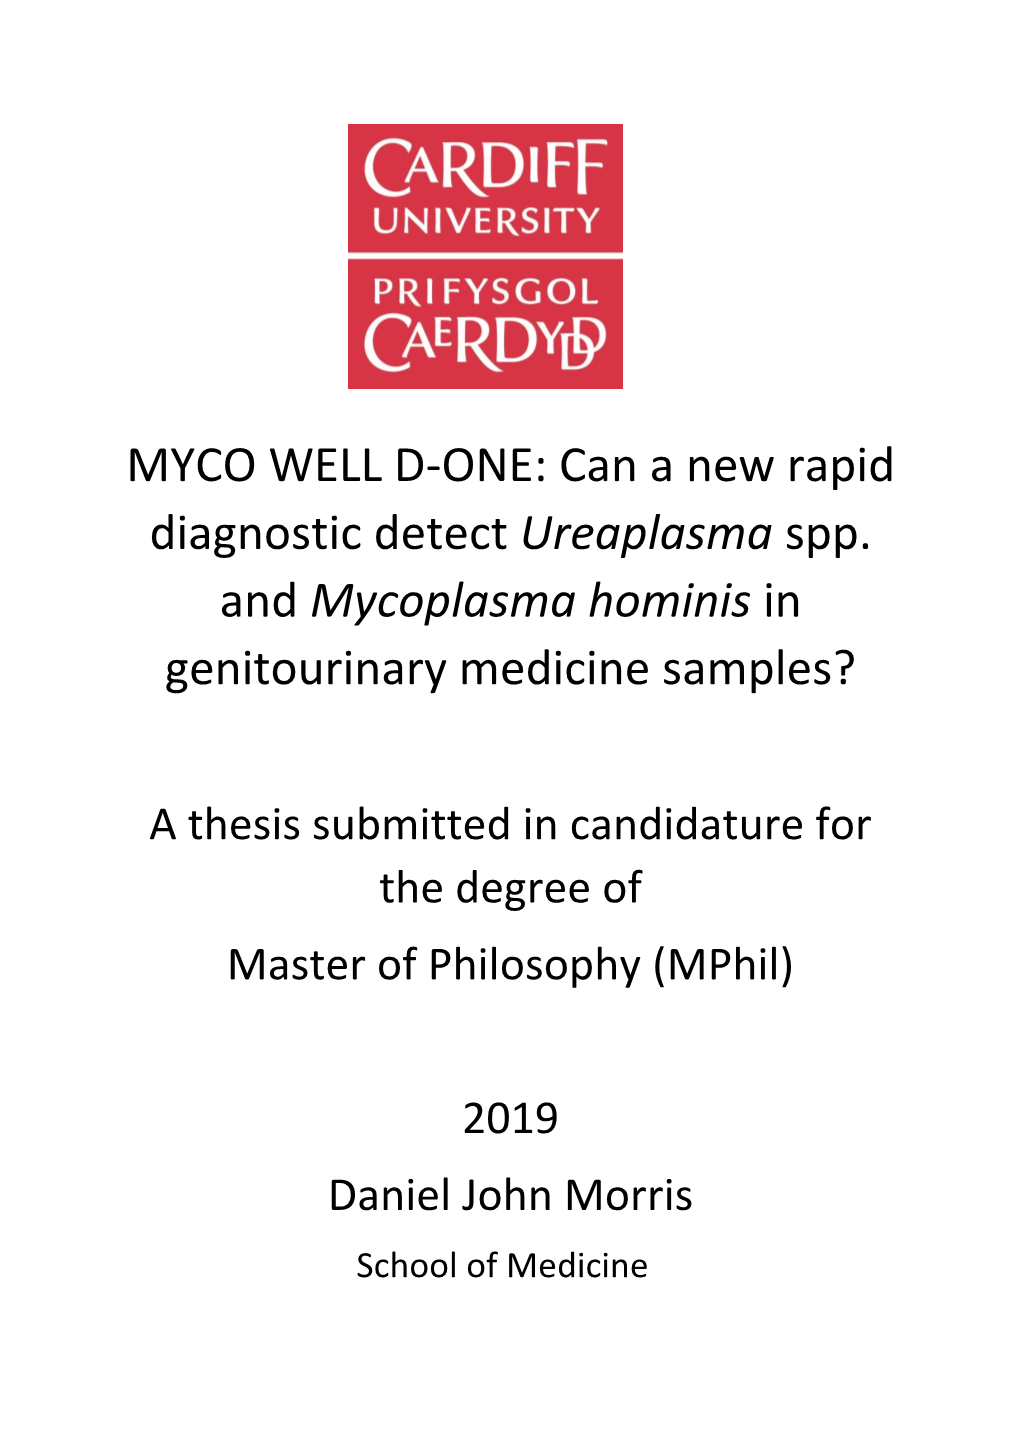 MYCO WELL D-ONE: Can a New Rapid Diagnostic Detect Ureaplasma Spp. and Mycoplasma Hominis in Genitourinary Medicine Samples?